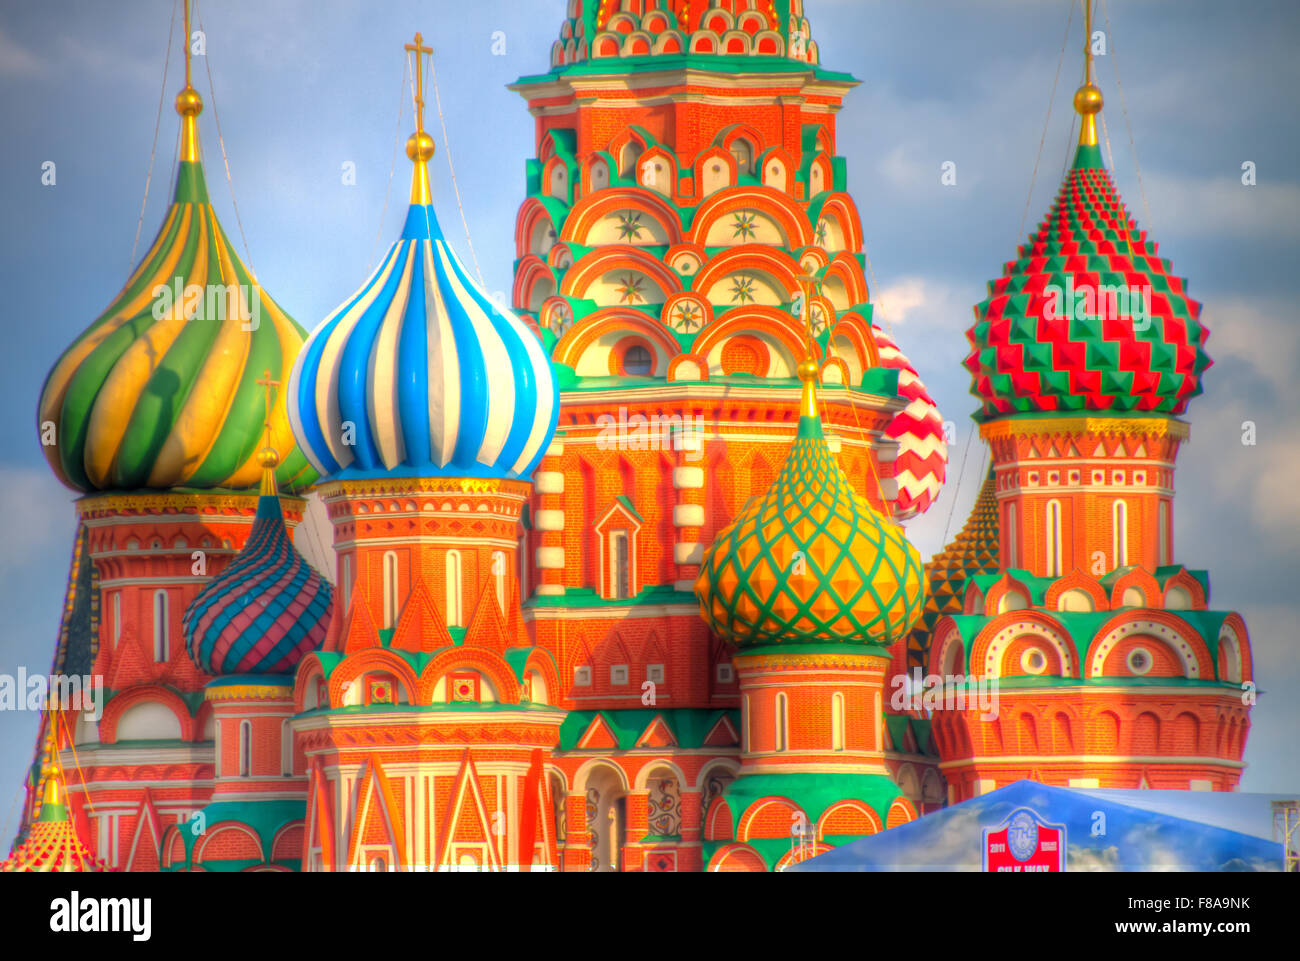 St. Basil's Cathedral. Moscow, Russia Federation, Red Square, Built 1554-61 Stock Photo